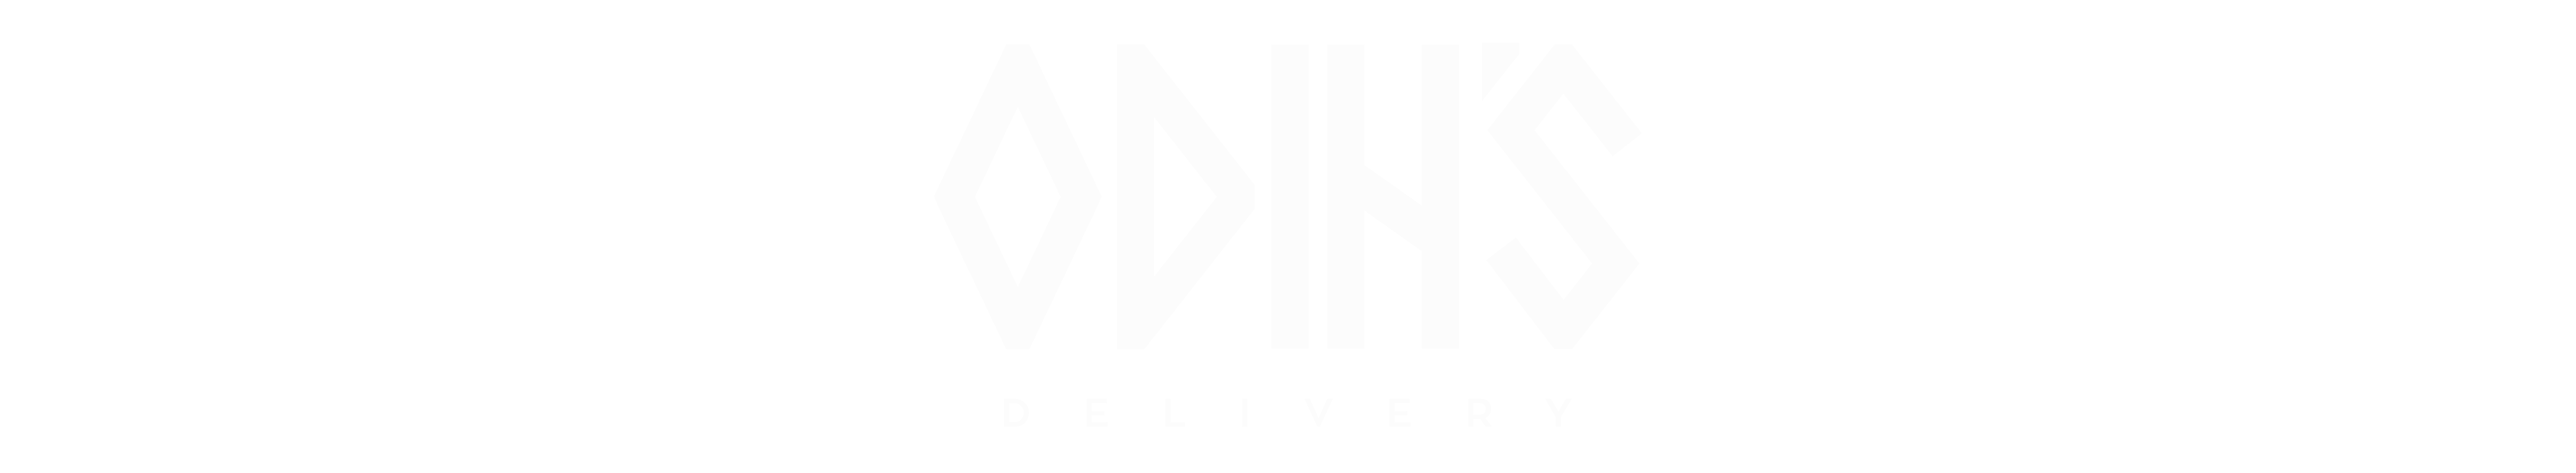 Odin's Delivery